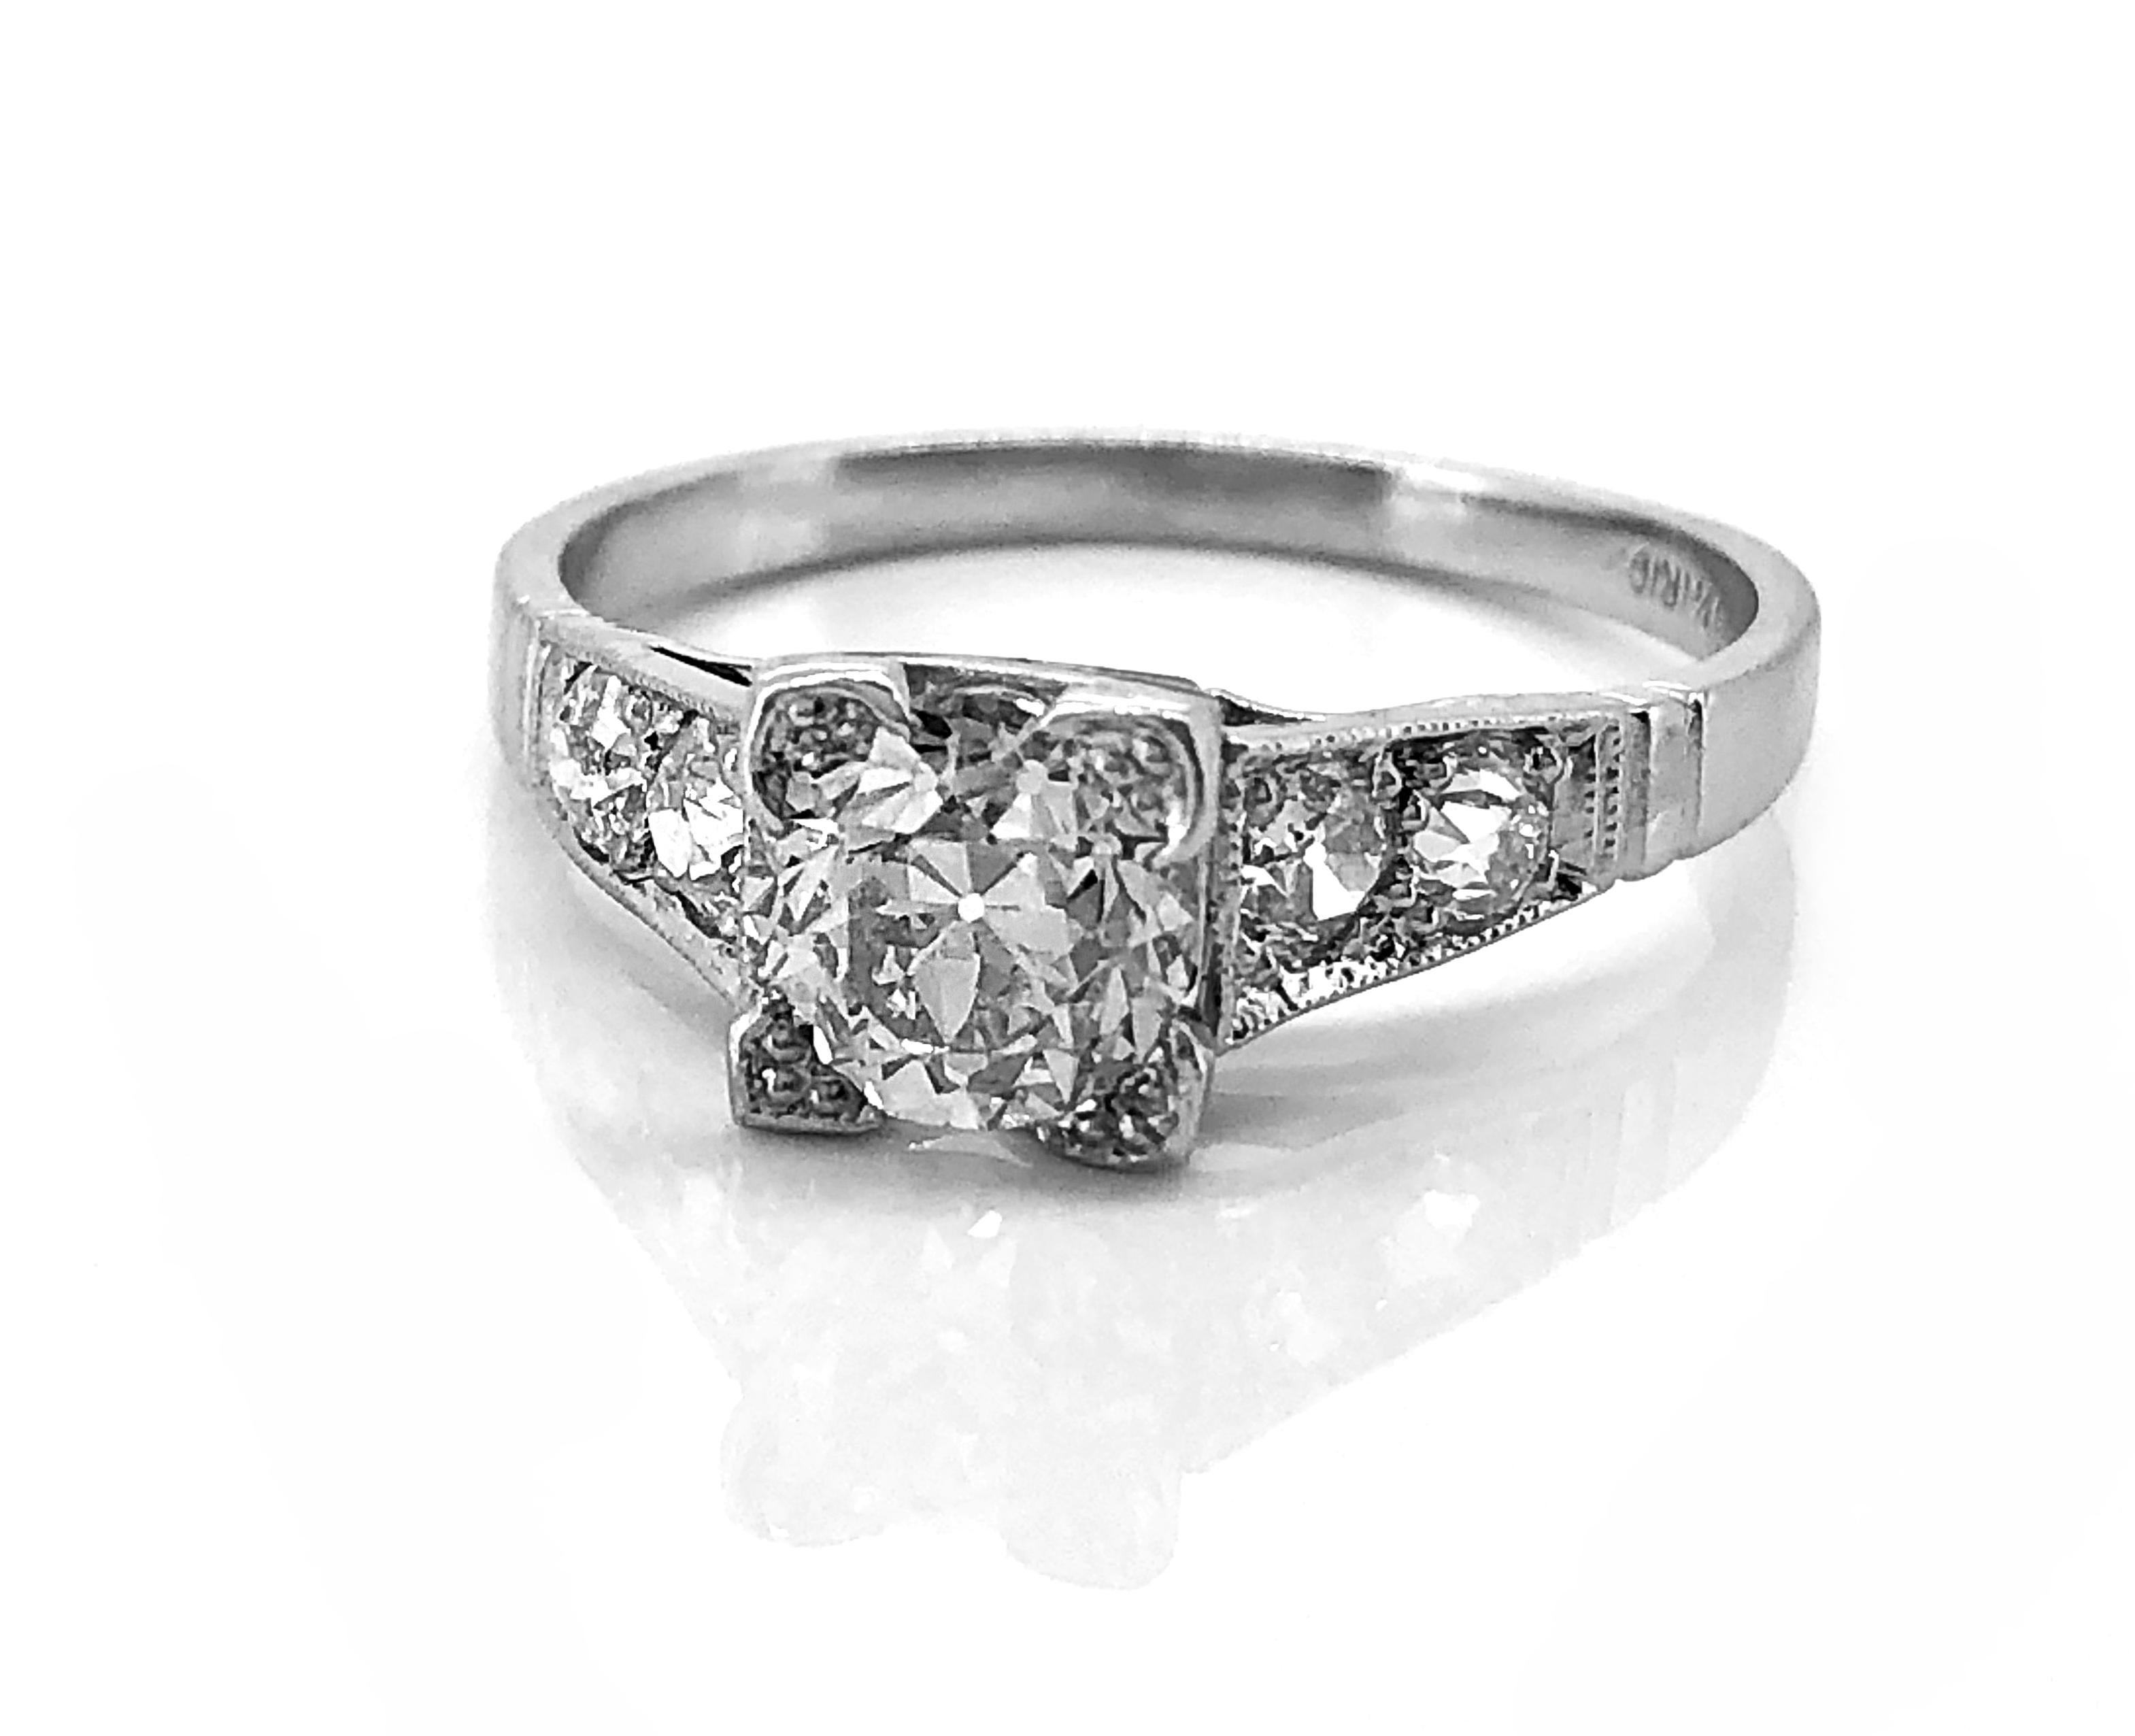 A very feminine Art Deco platinum and diamond Antique engagement ring featuring a 1.22ct. apx. European cut center diamond with VS1 clarity and J color. The accenting side diamonds are .40ct. apx. T.W. and are also of wonderful quality. This ring is